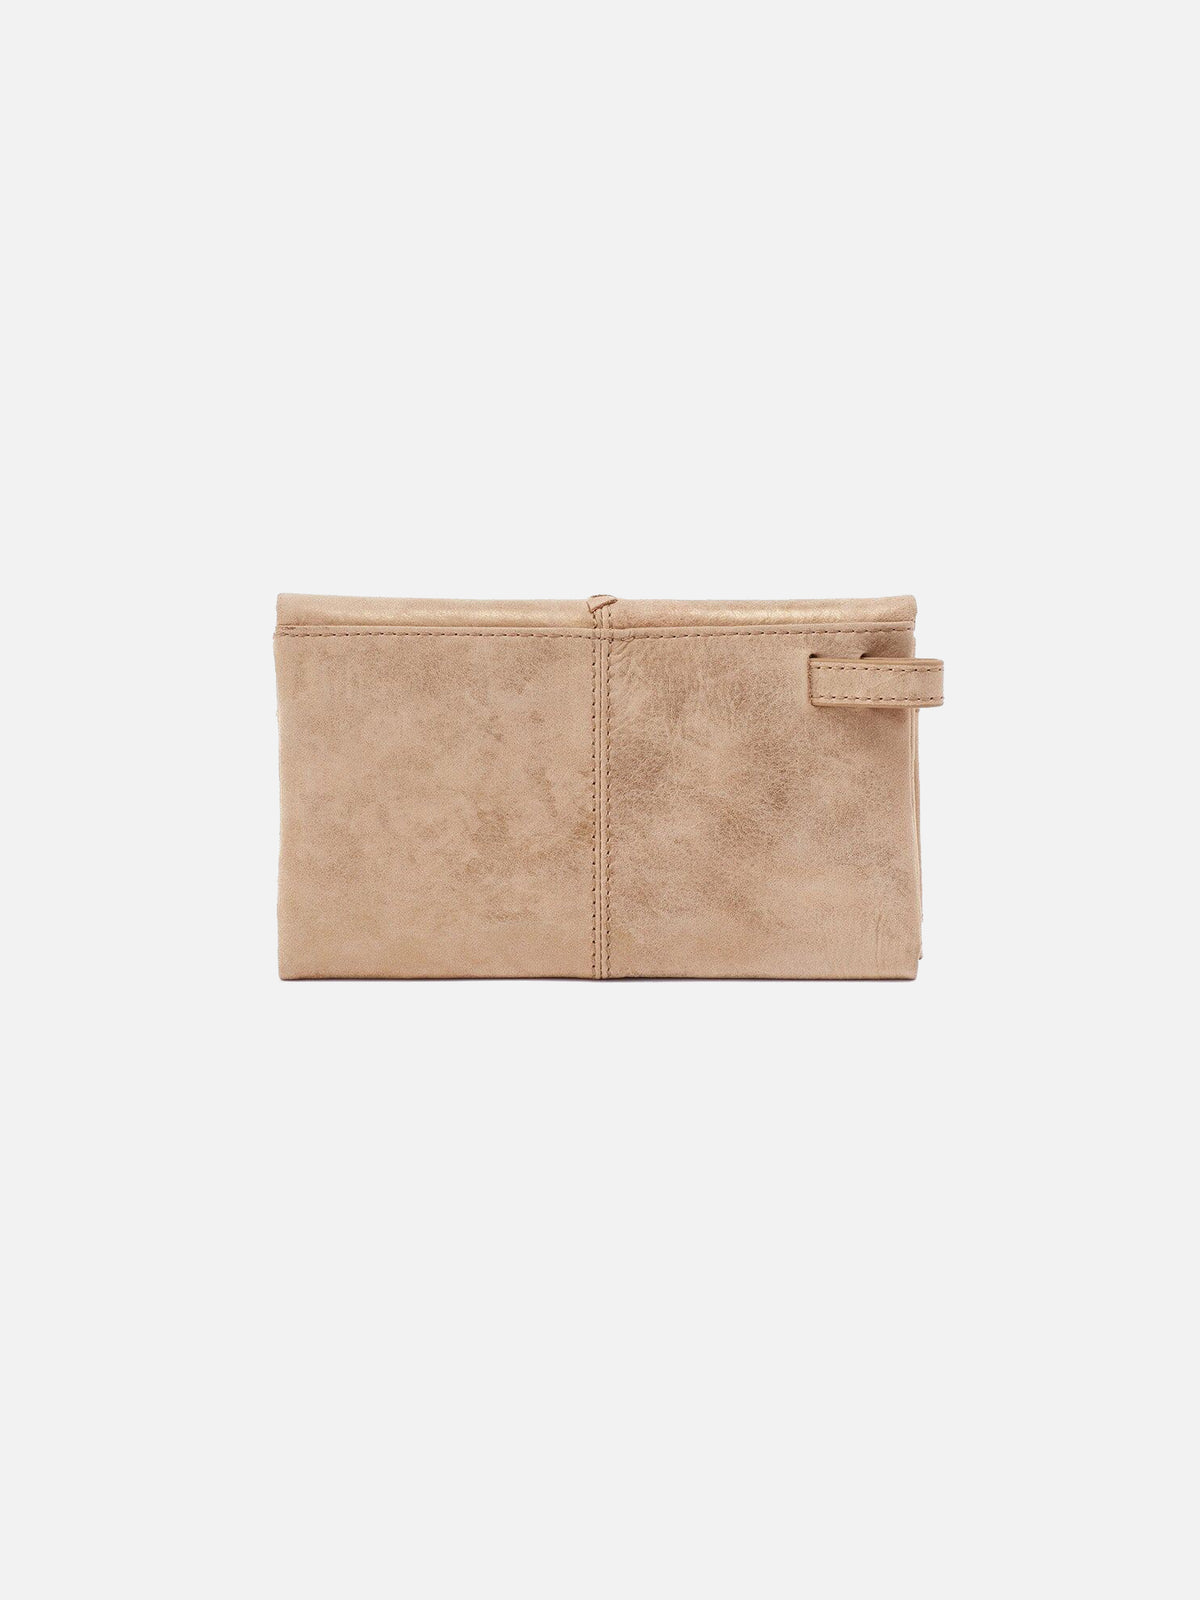 hobo keen continental wallet in golden cashmere nubuck leather